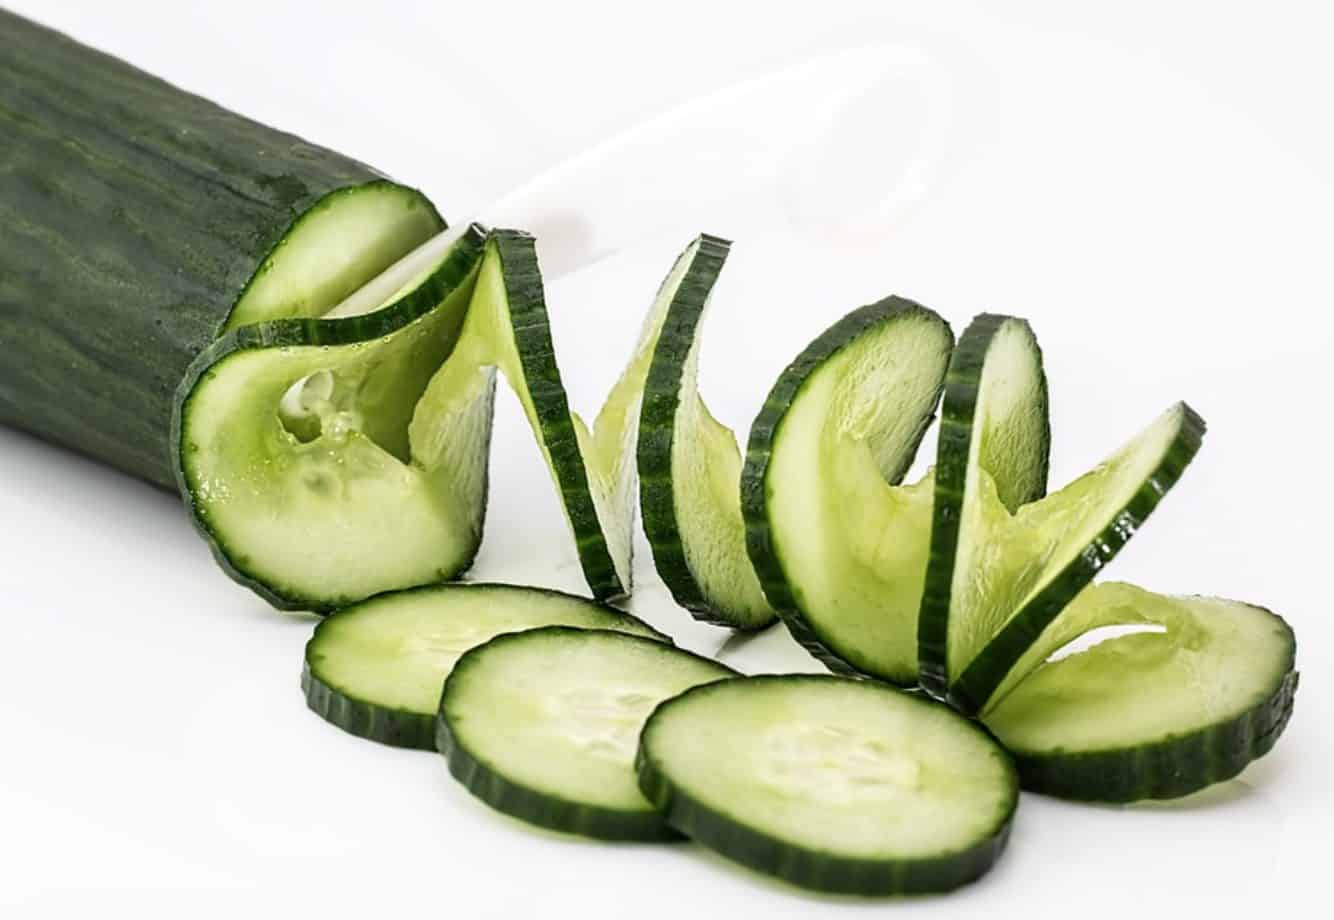 Can dogs eat cucumber skin? No, unless they are cut up into small thin slices.